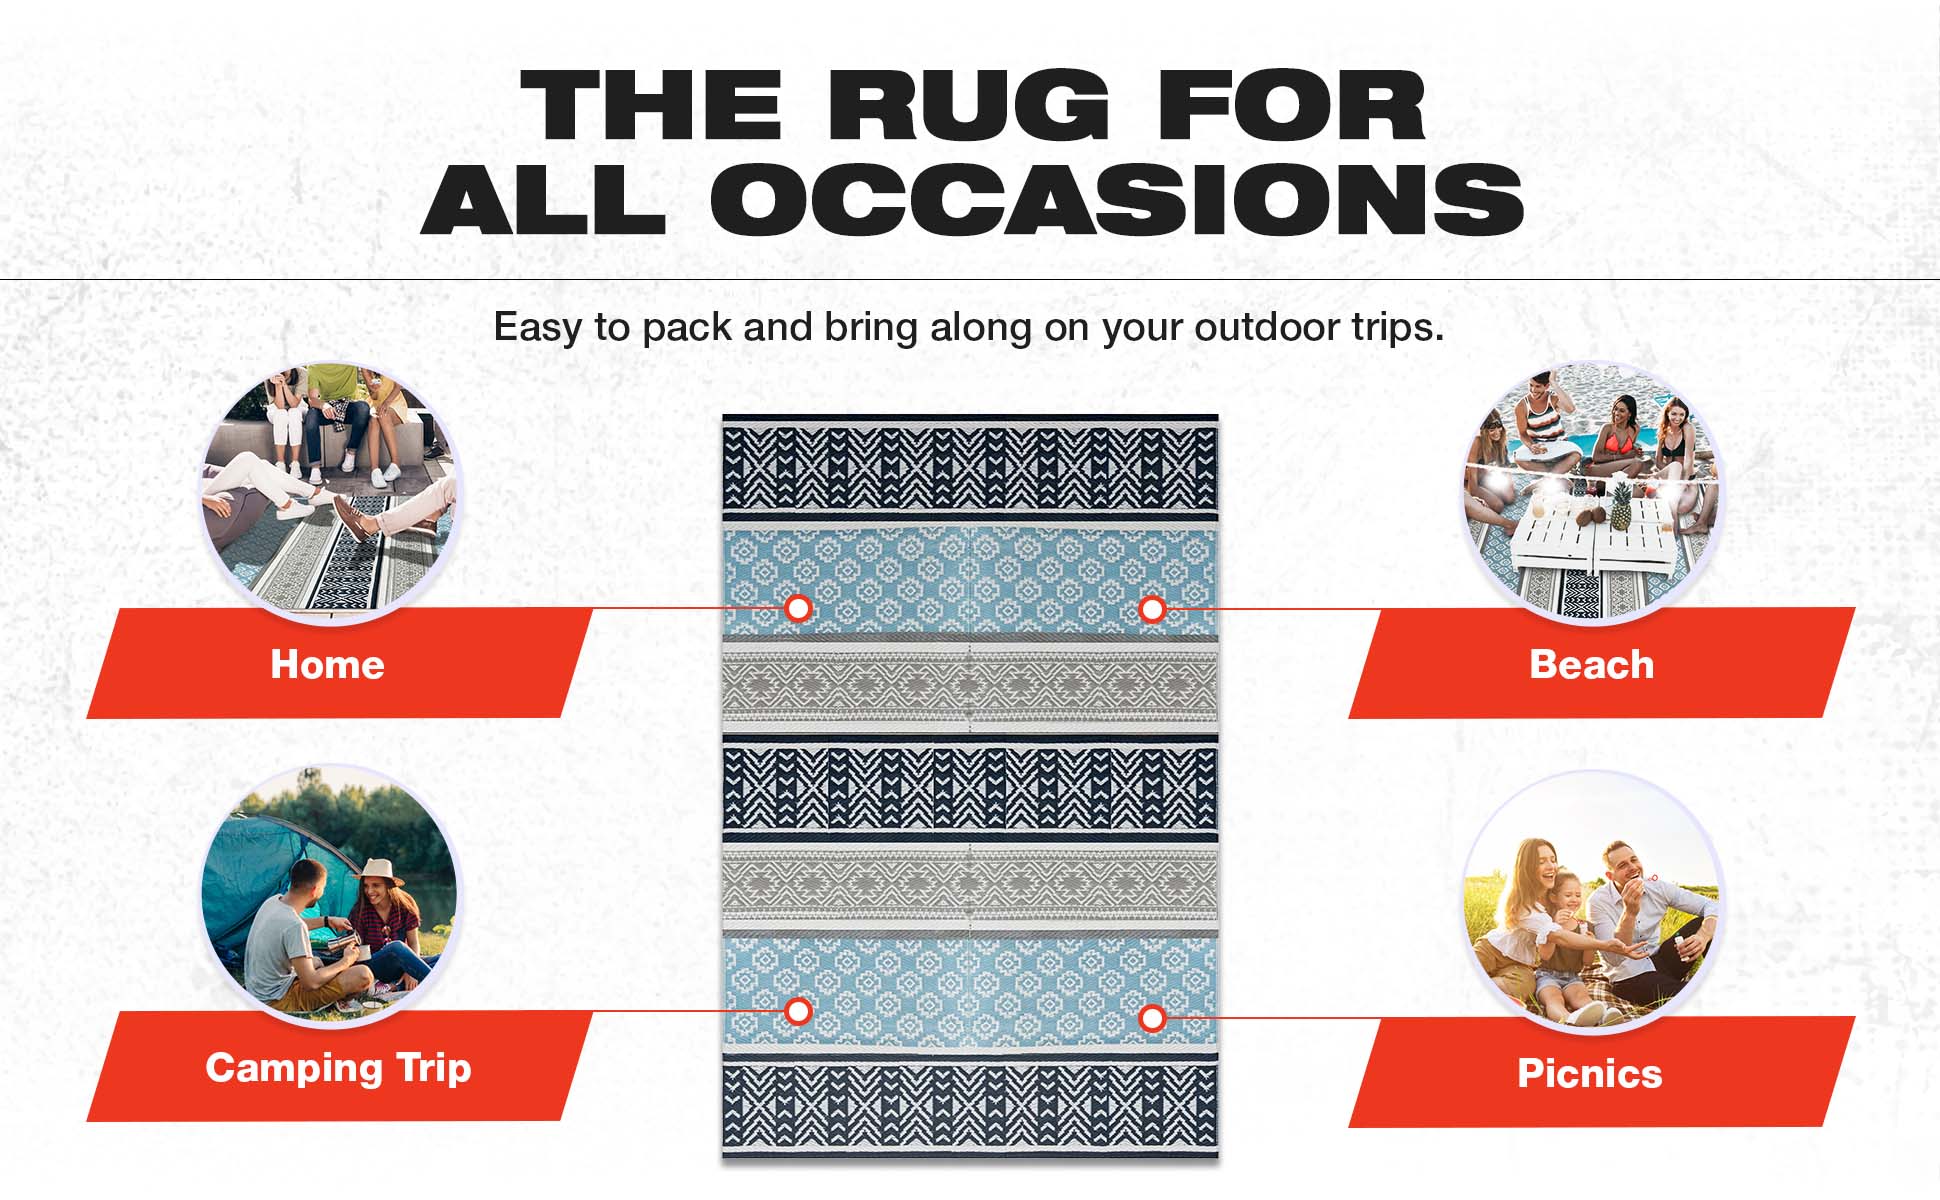 BalajeesUSA Outdoor rugs Plastic straw patio rugs-5 by 7 feet. Grey,Teal reversible mats waterproof rv camper mats patio rugs Clearance 7001 - image 3 of 9